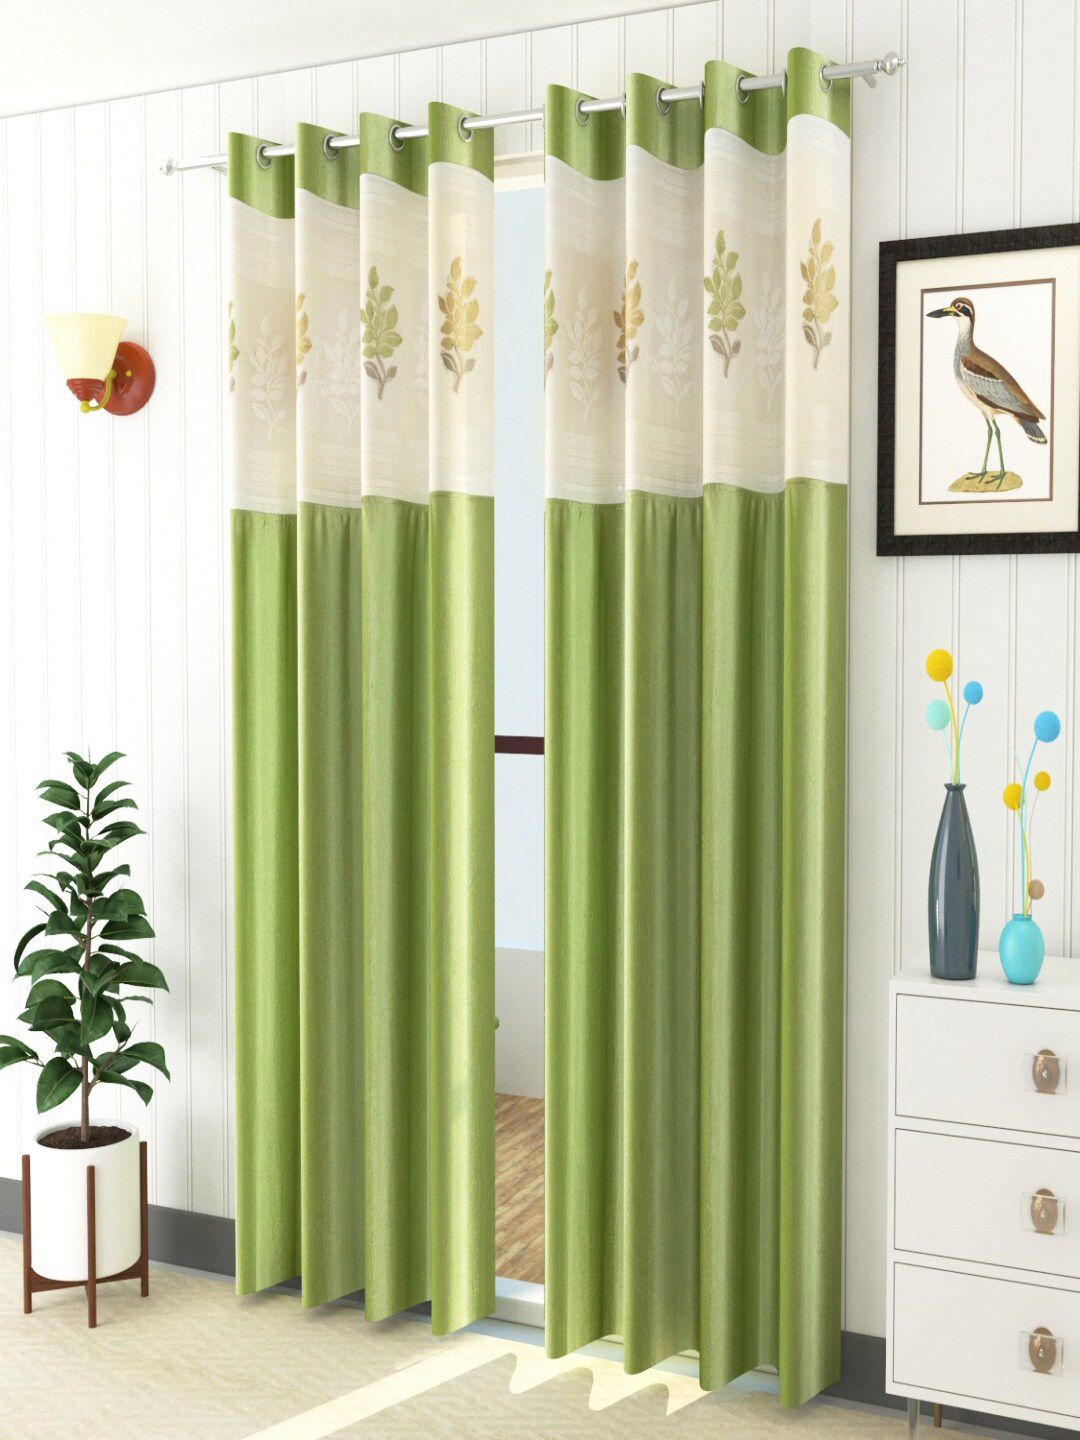 Homefab India Green & White Set of 2 Floral Sheer Window Curtain Price in India